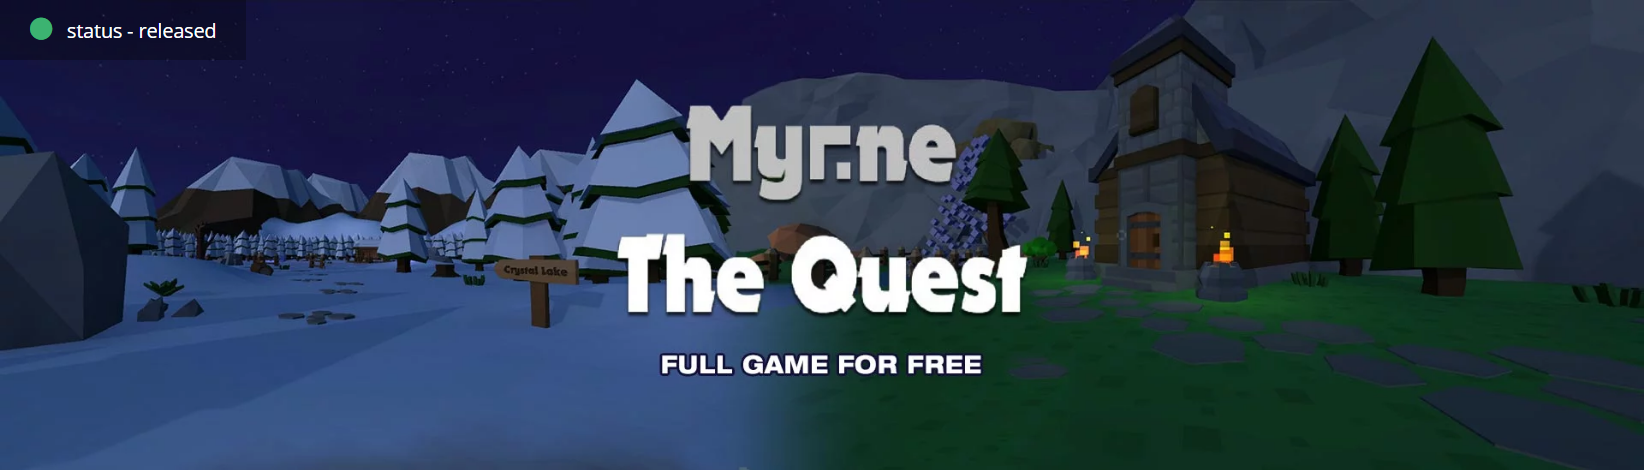 Screenshot_2019-08-07 Myrne The Quest Indiegala Developers.png